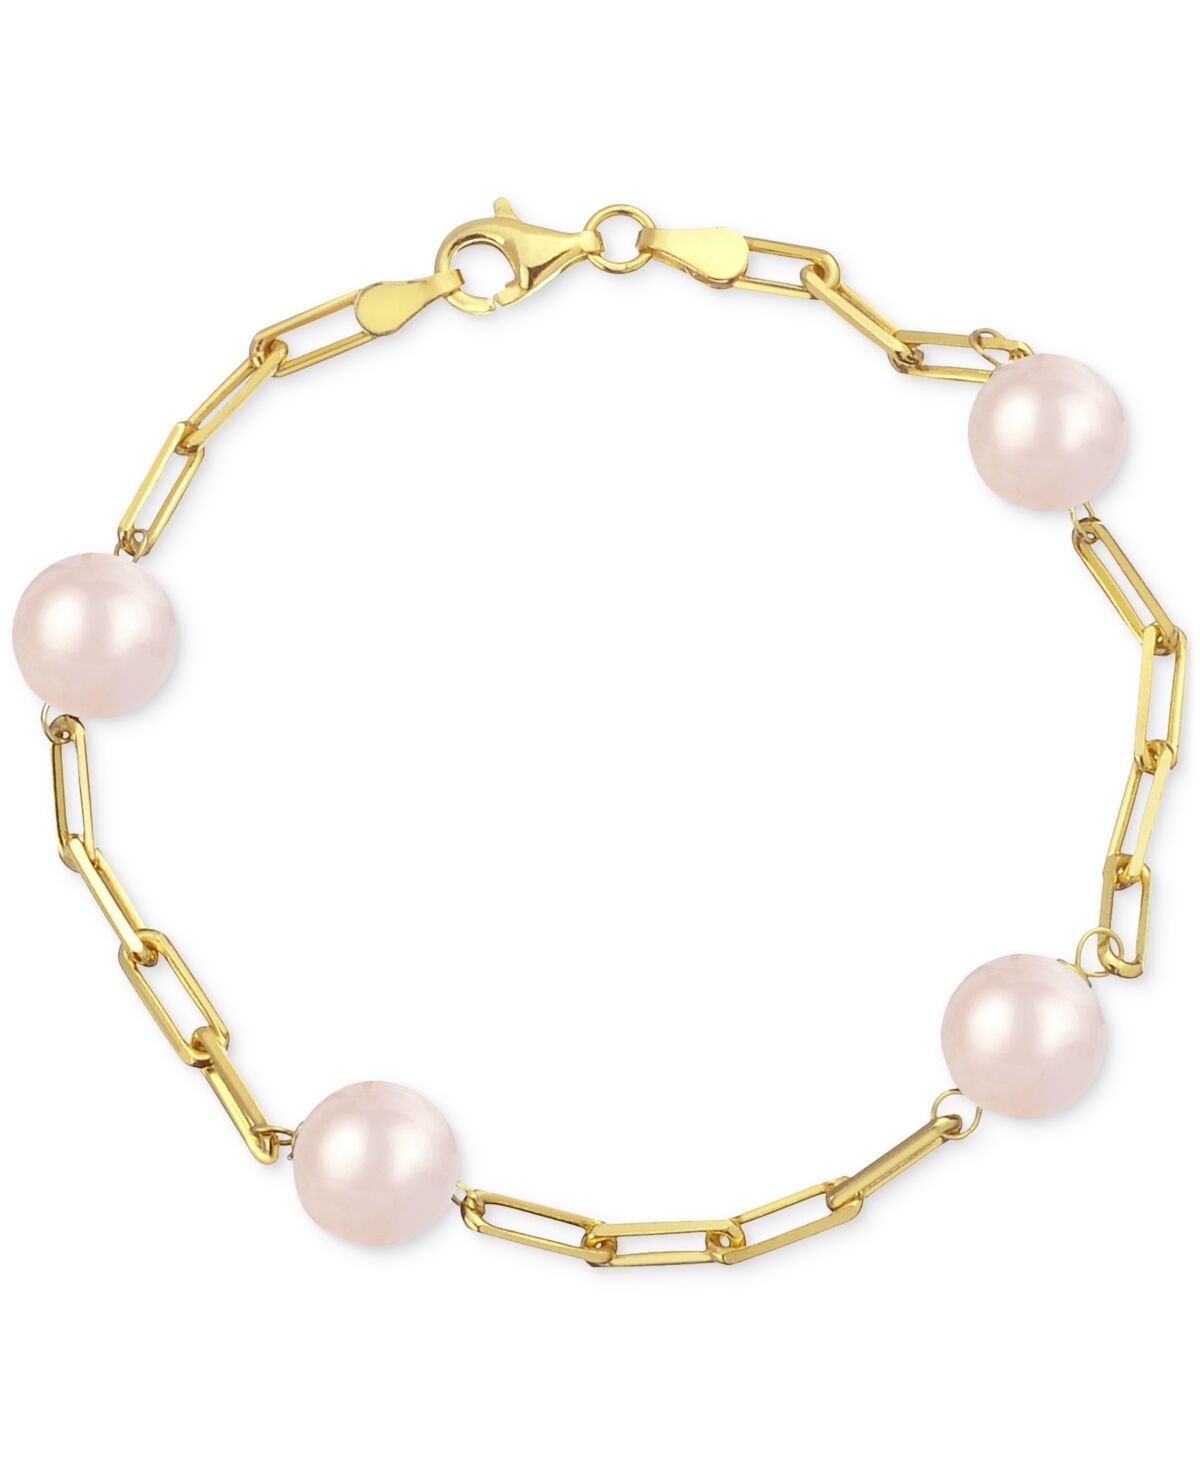 Macy's Onyx Bead Paperclip Link Bracelet in 18k Gold-Plated Sterling Silver (Also in Turquoise, Lapis Lazuli, Red Coral, & Rose Quartz) - Rose Quartz